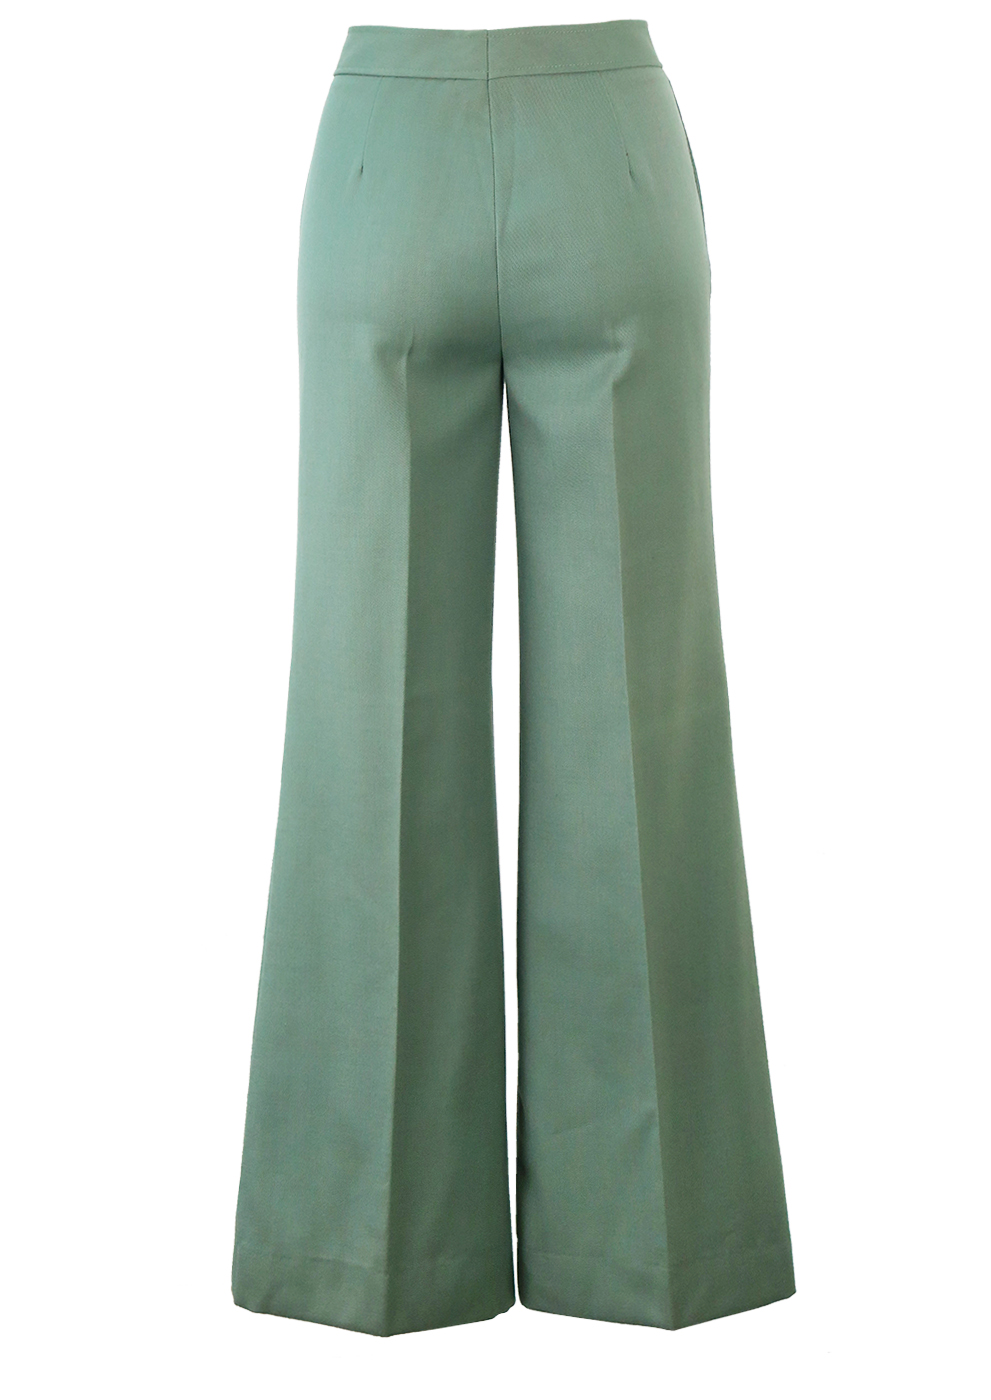 Vintage 70's Flared Green Trousers - S | Reign Vintage